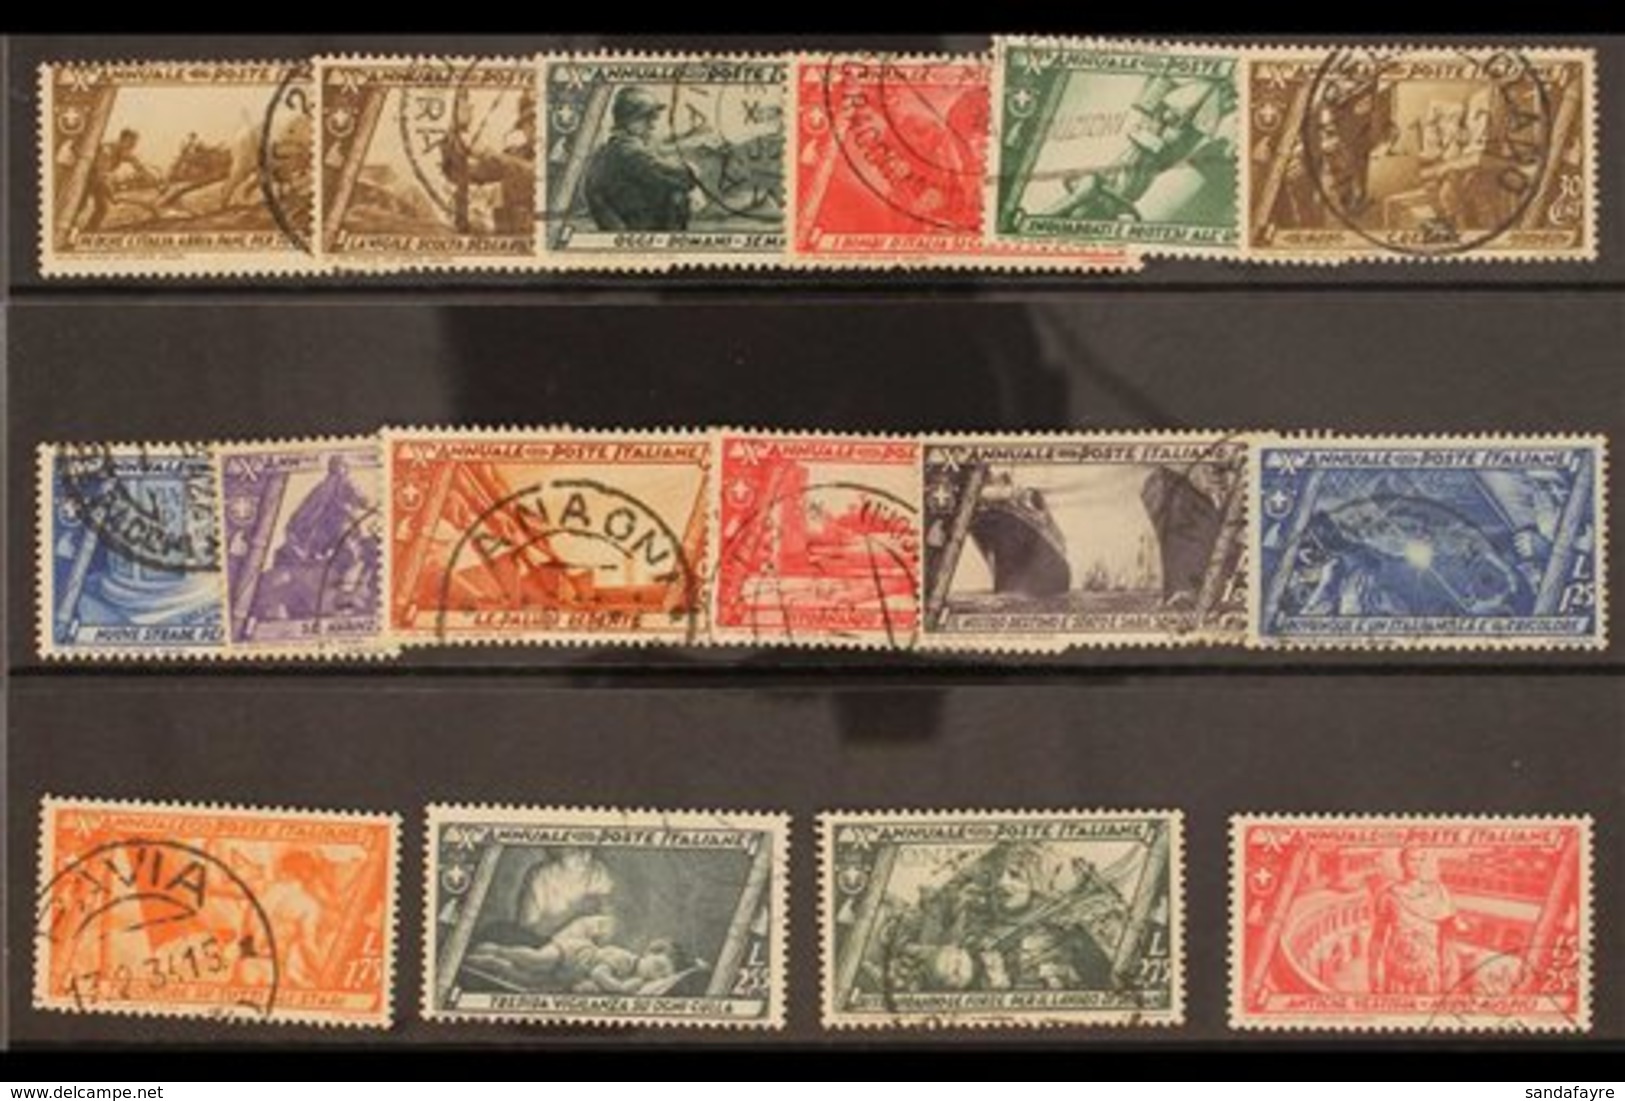 1932 Fascist March On Rome (Postage) Complete Set (Sass S. 65, SG 350/65) Used. (16 Stamps) For More Images, Please Visi - Non Classés